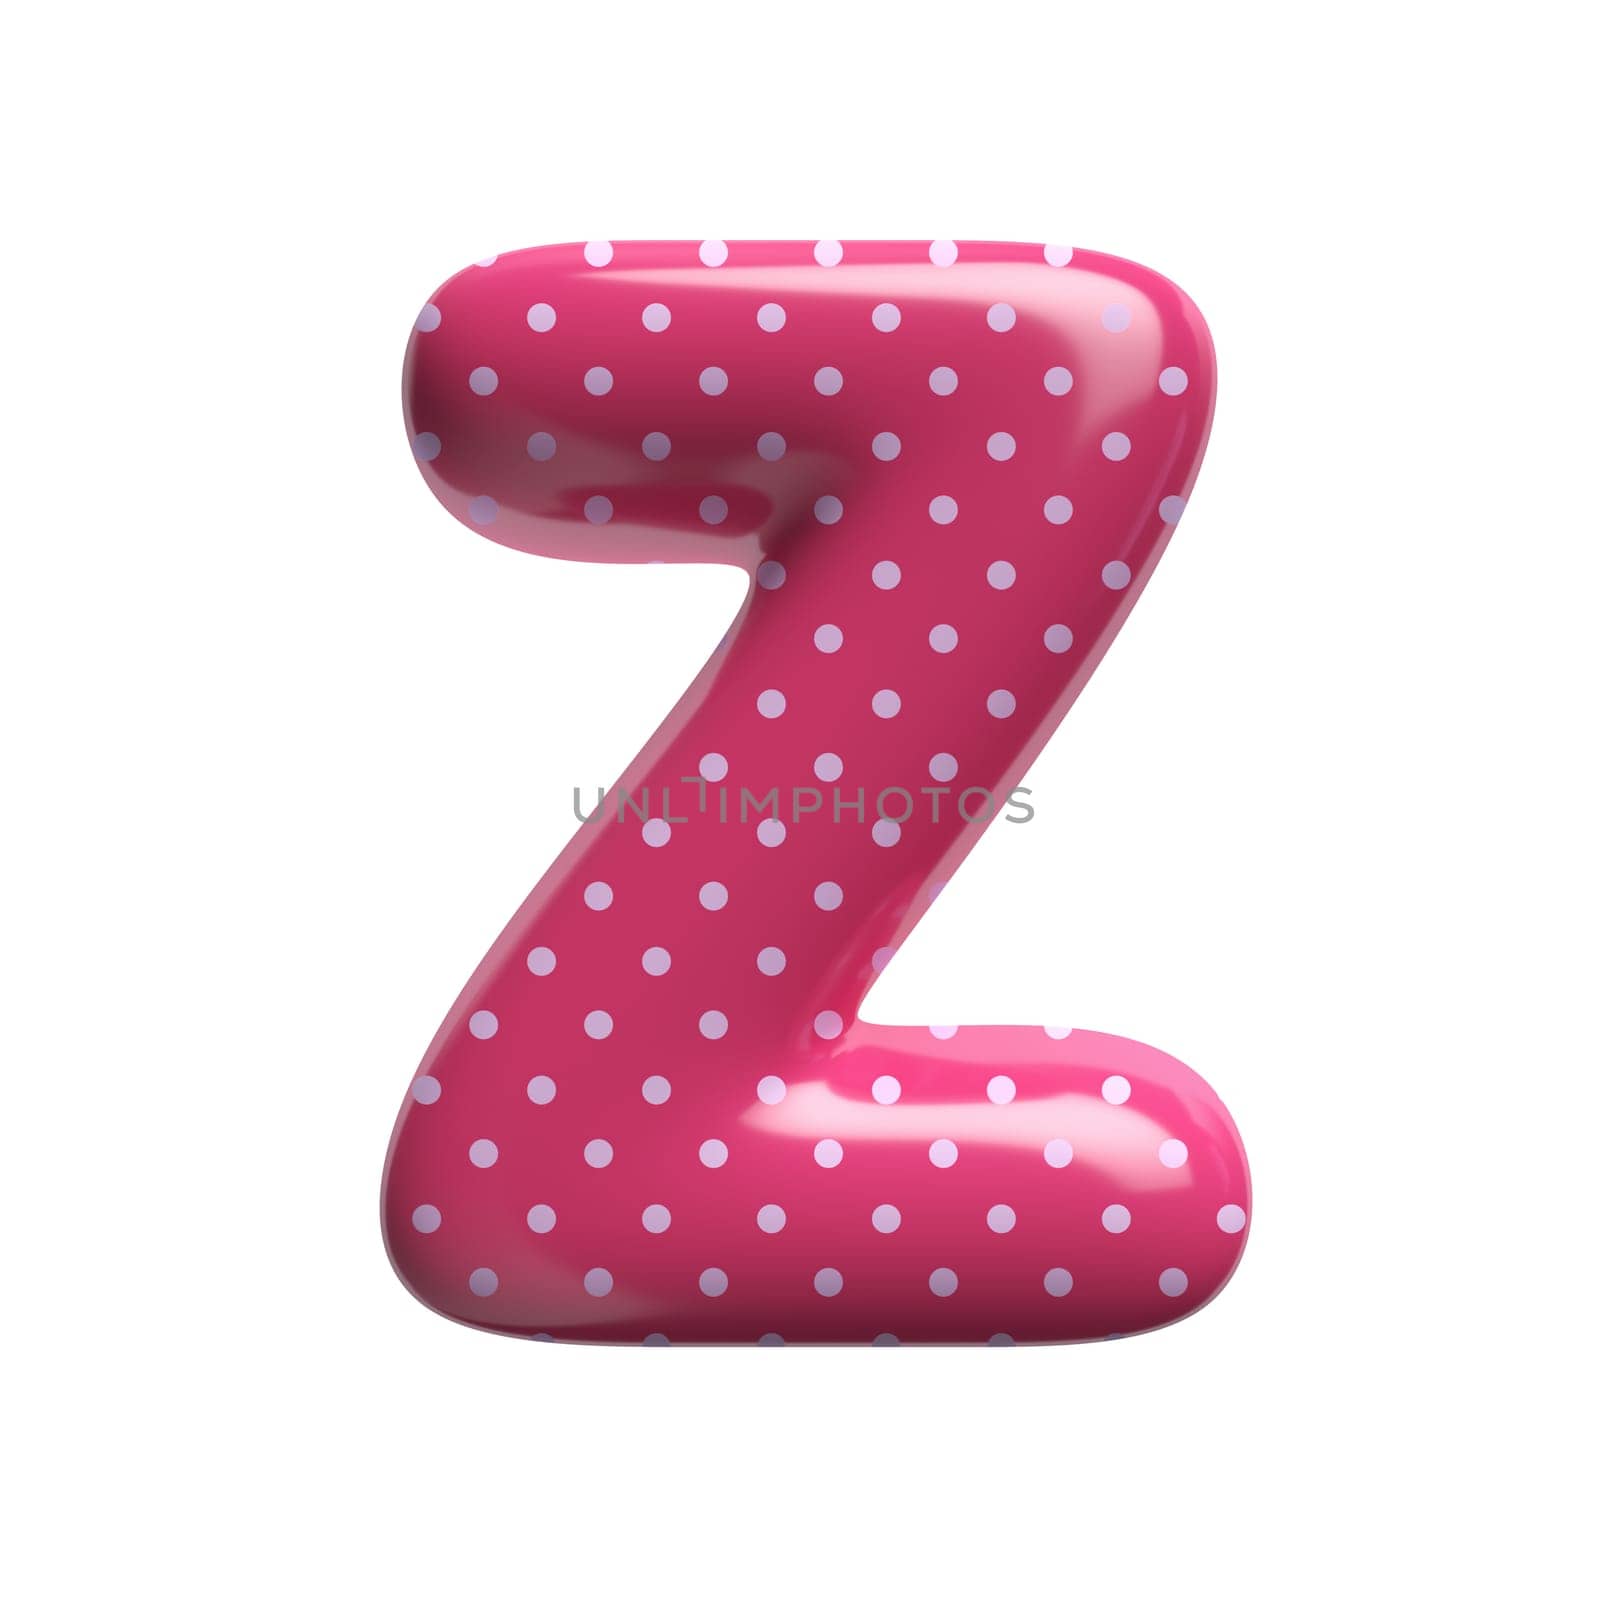 Polka dot letter Z - Capital 3d pink retro font isolated on white background. This alphabet is perfect for creative illustrations related but not limited to Fashion, retro design, decoration...